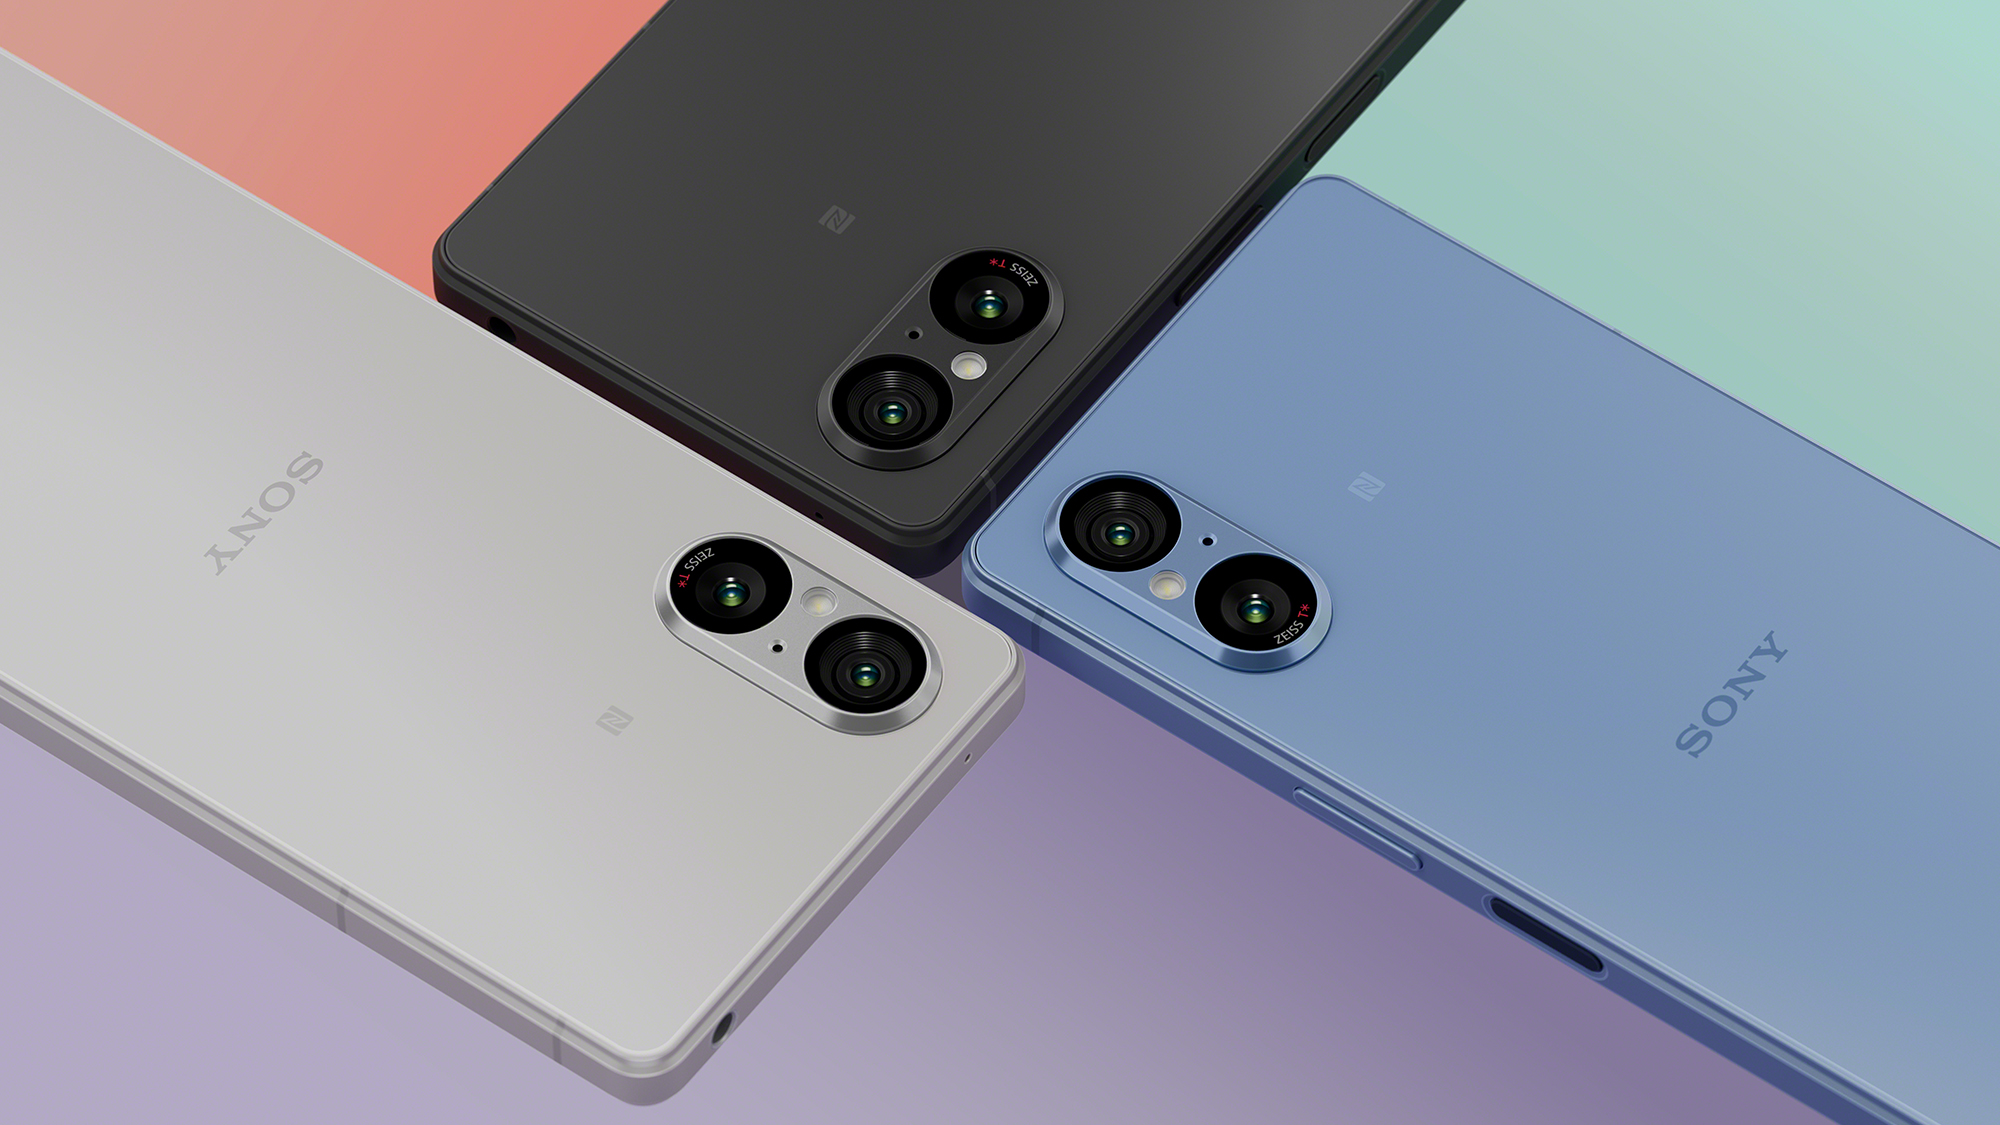 Sony Xperia 5 V announced: release date, features, and everything